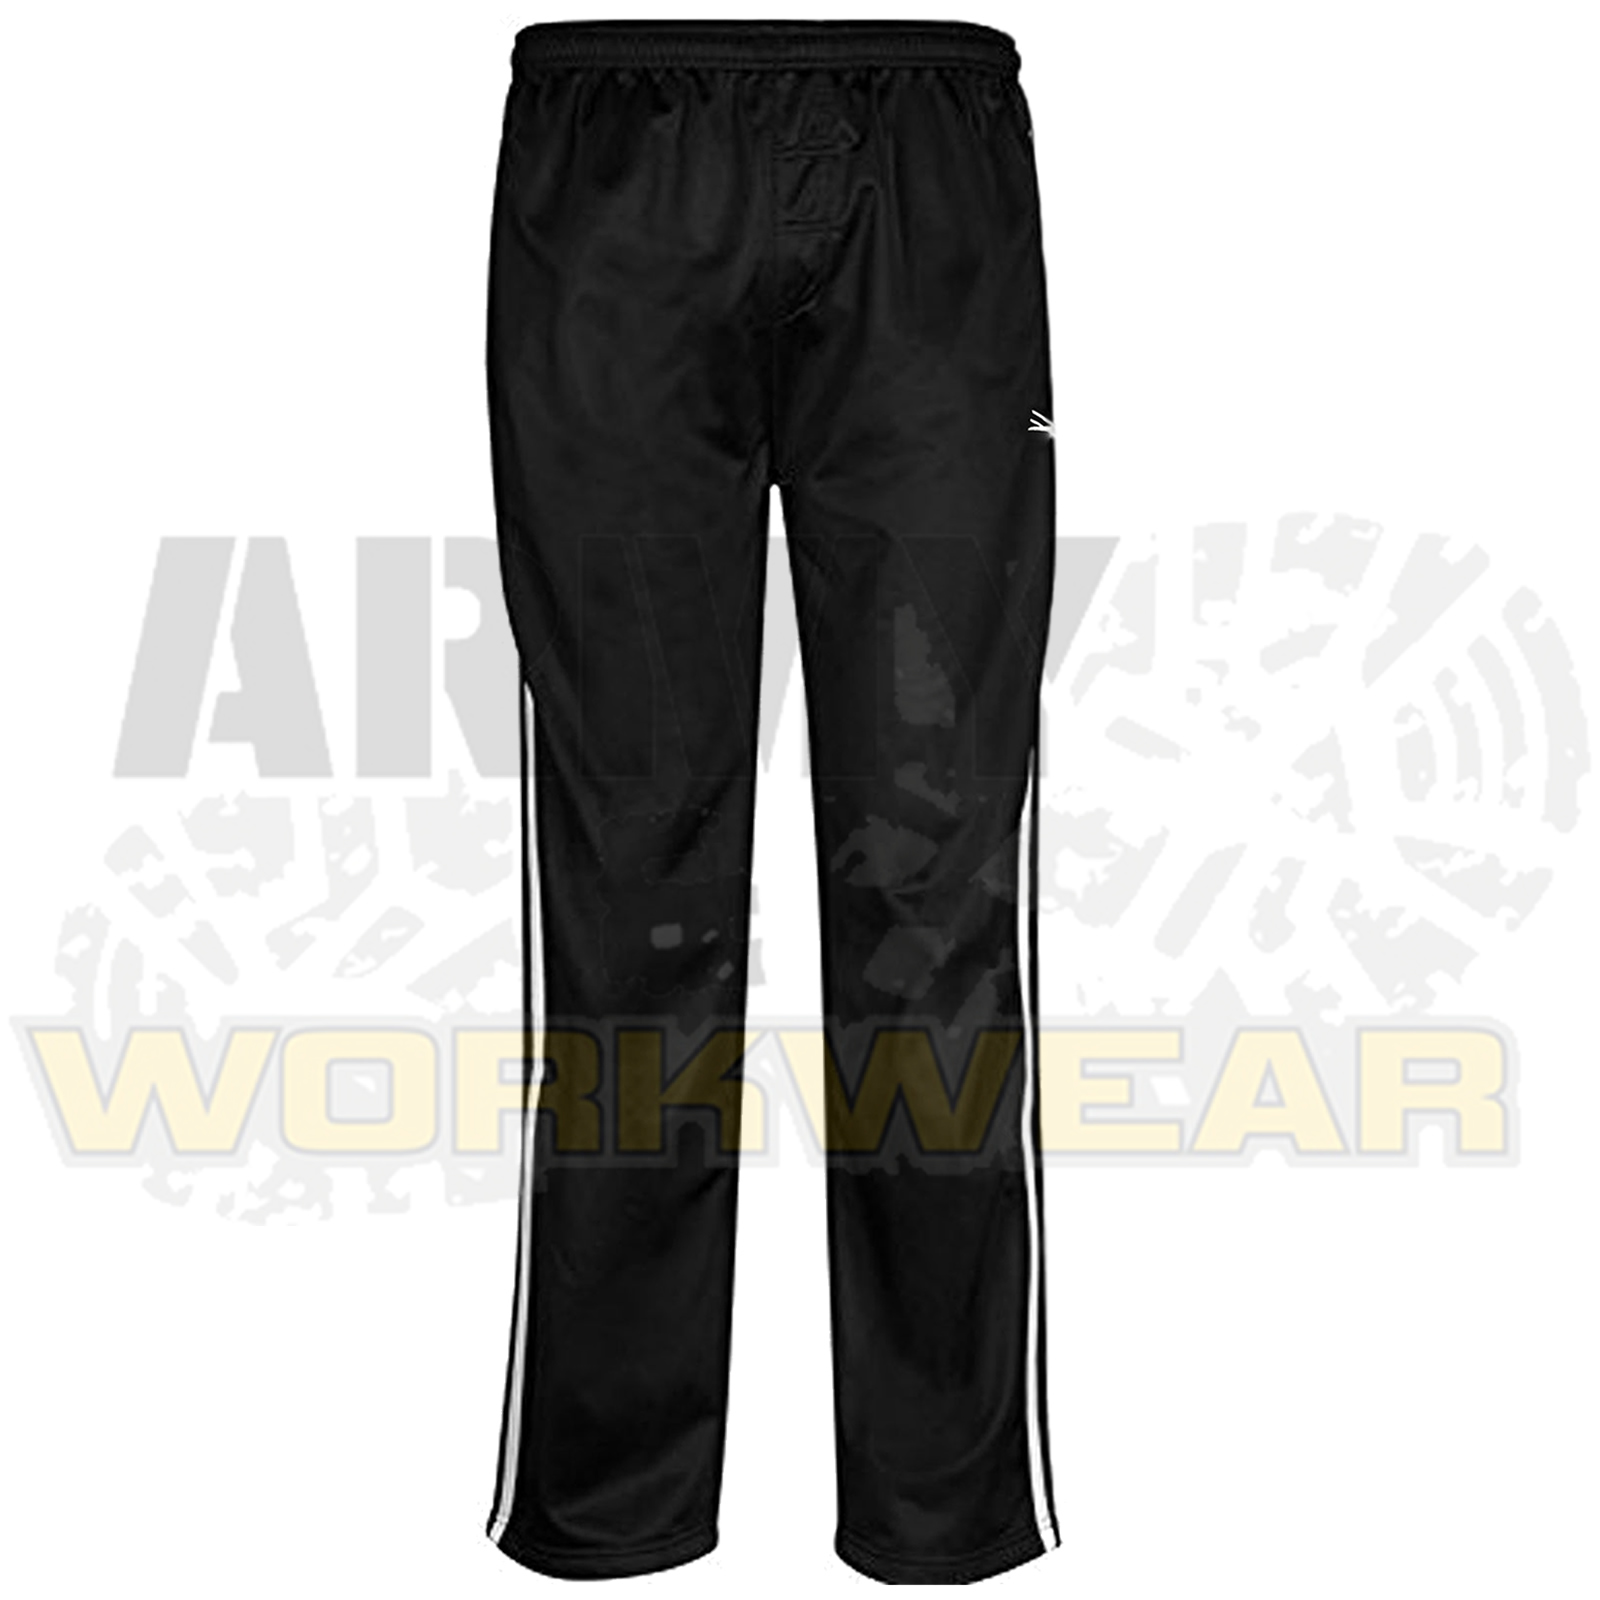 FASHION REVIEW New Men's Tracksuit Bottoms Silky Joggers Gym Jogging Striped Sweat Pants BA1